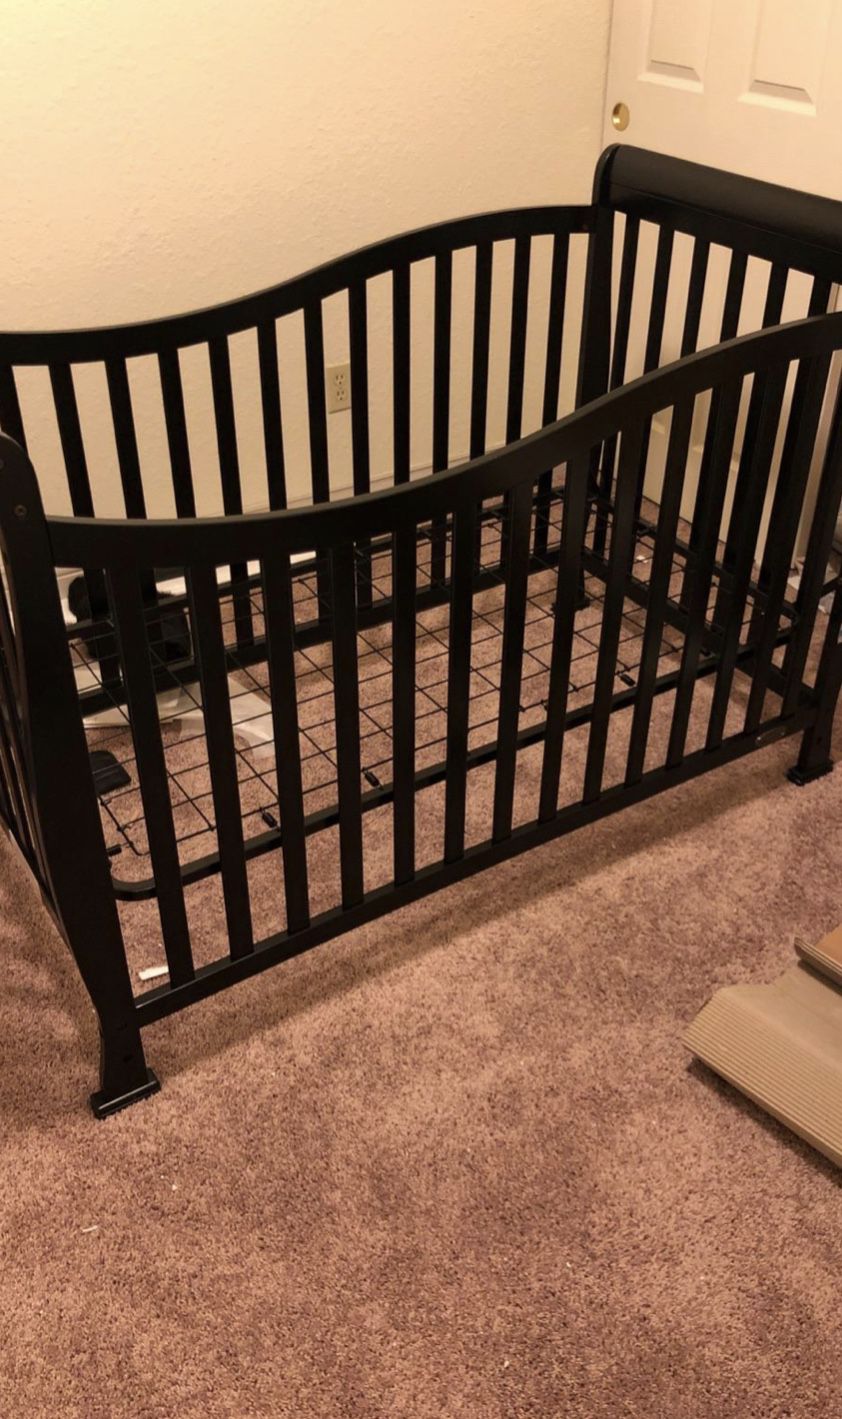 Baby Crib and Changing Table